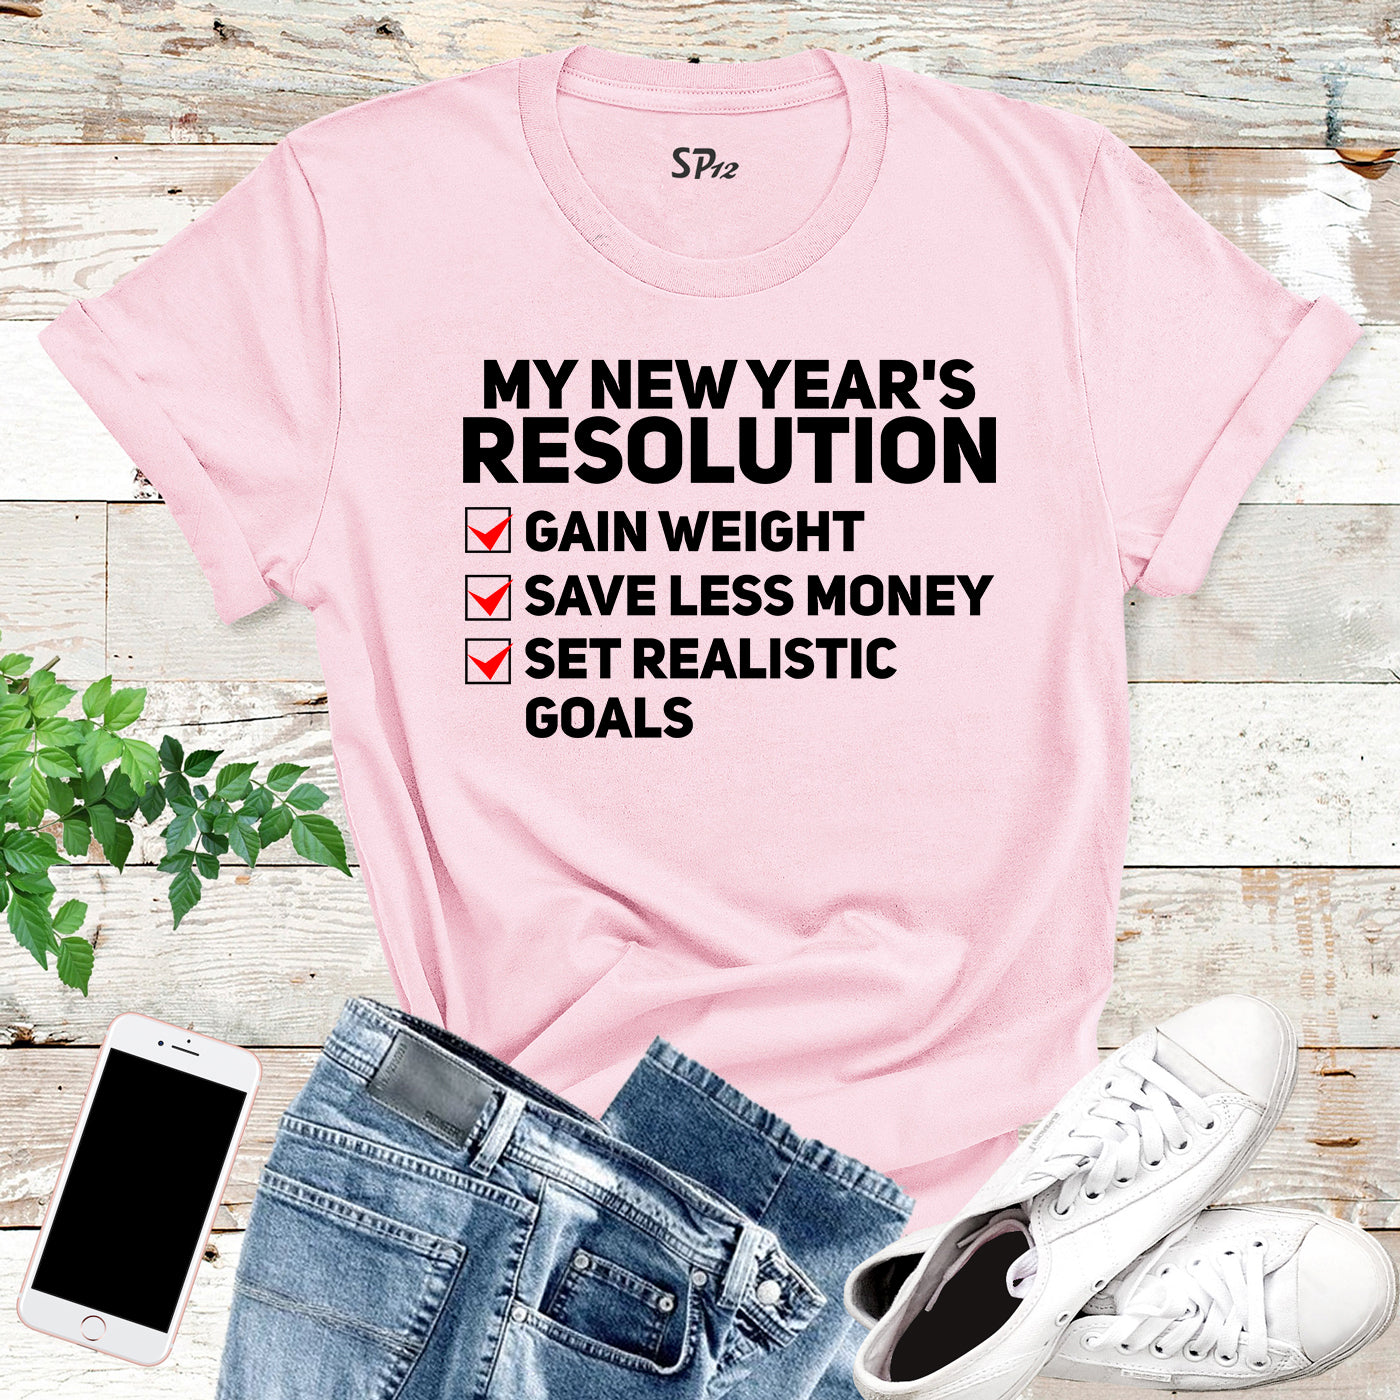 My New year's Resolution T Shirt